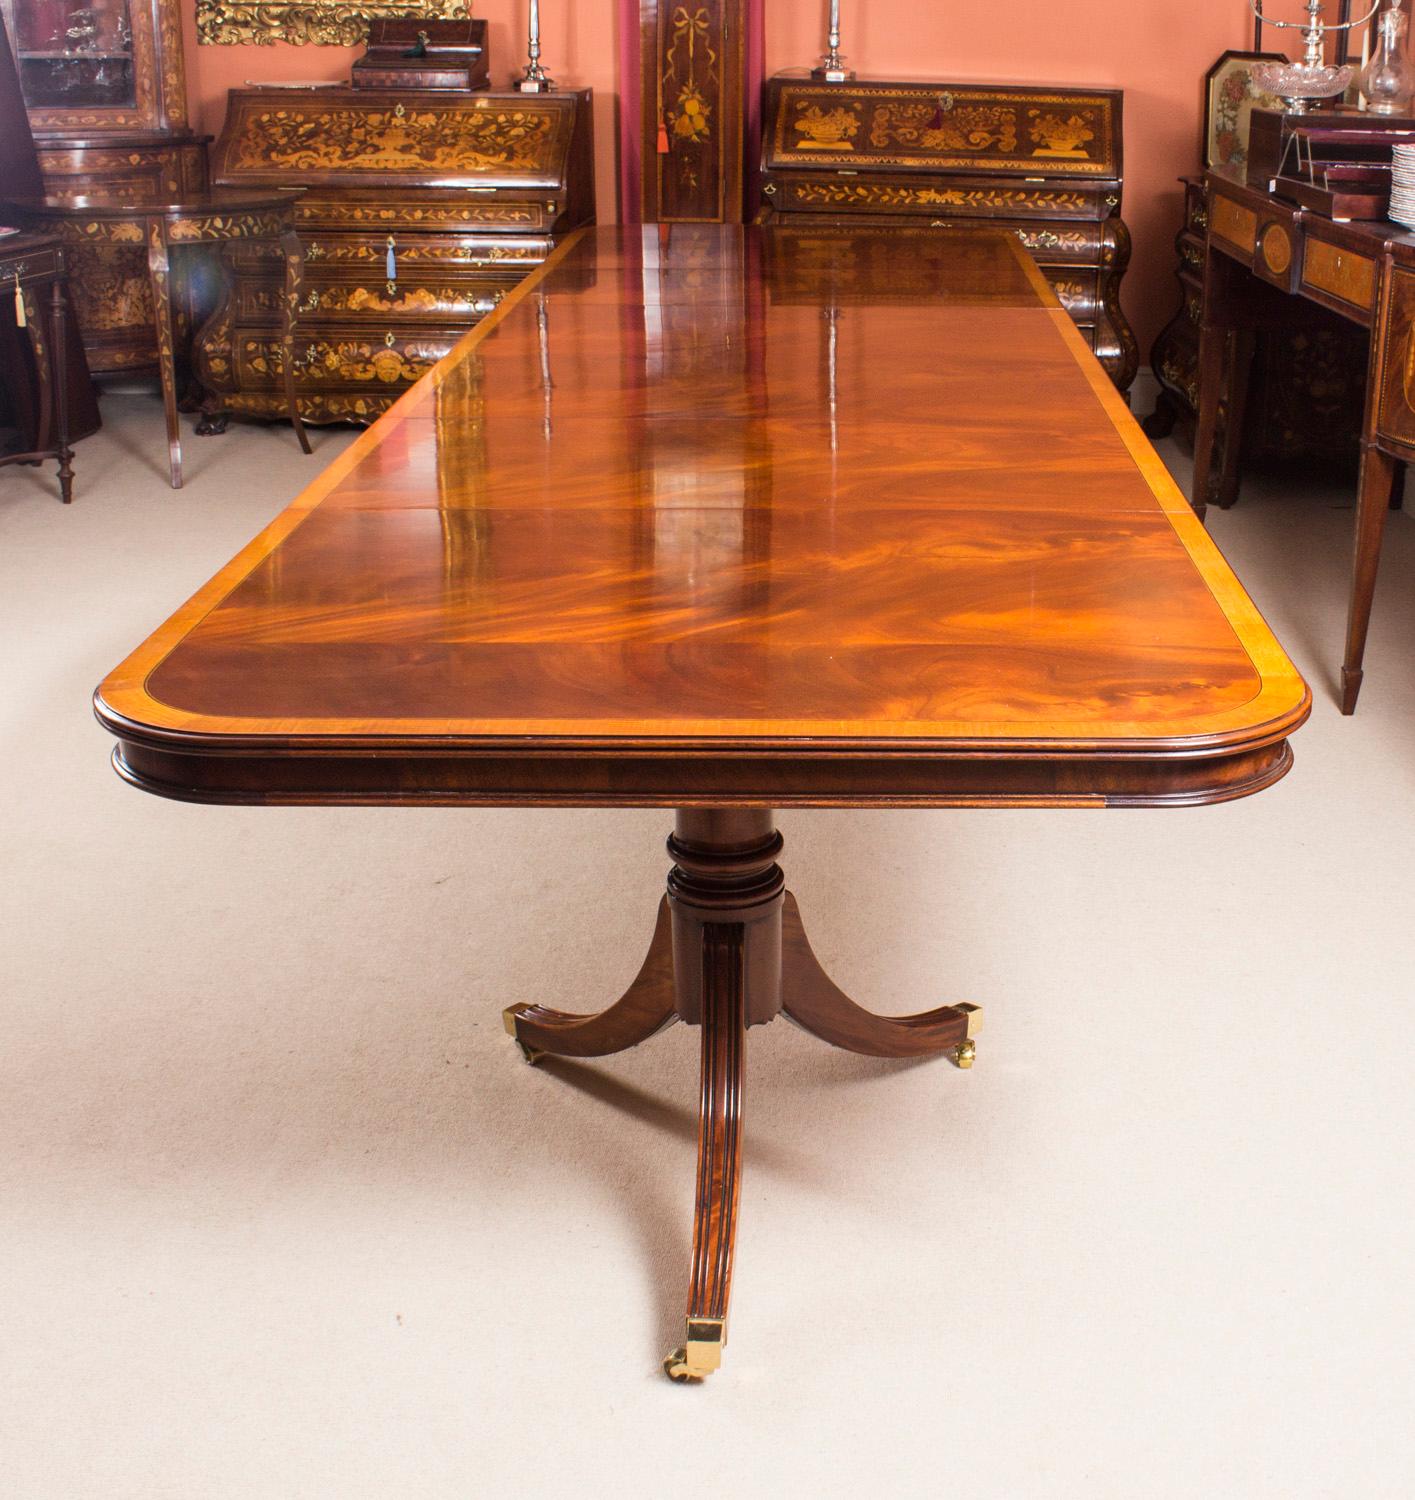 This is a superb vintage large dining table in elegant Regency style, crafted in flame mahogany, featuring superb satinwood crossbanded decoration on the top and dating from the second half of the 20th century.

Capable of seating sixteen people in